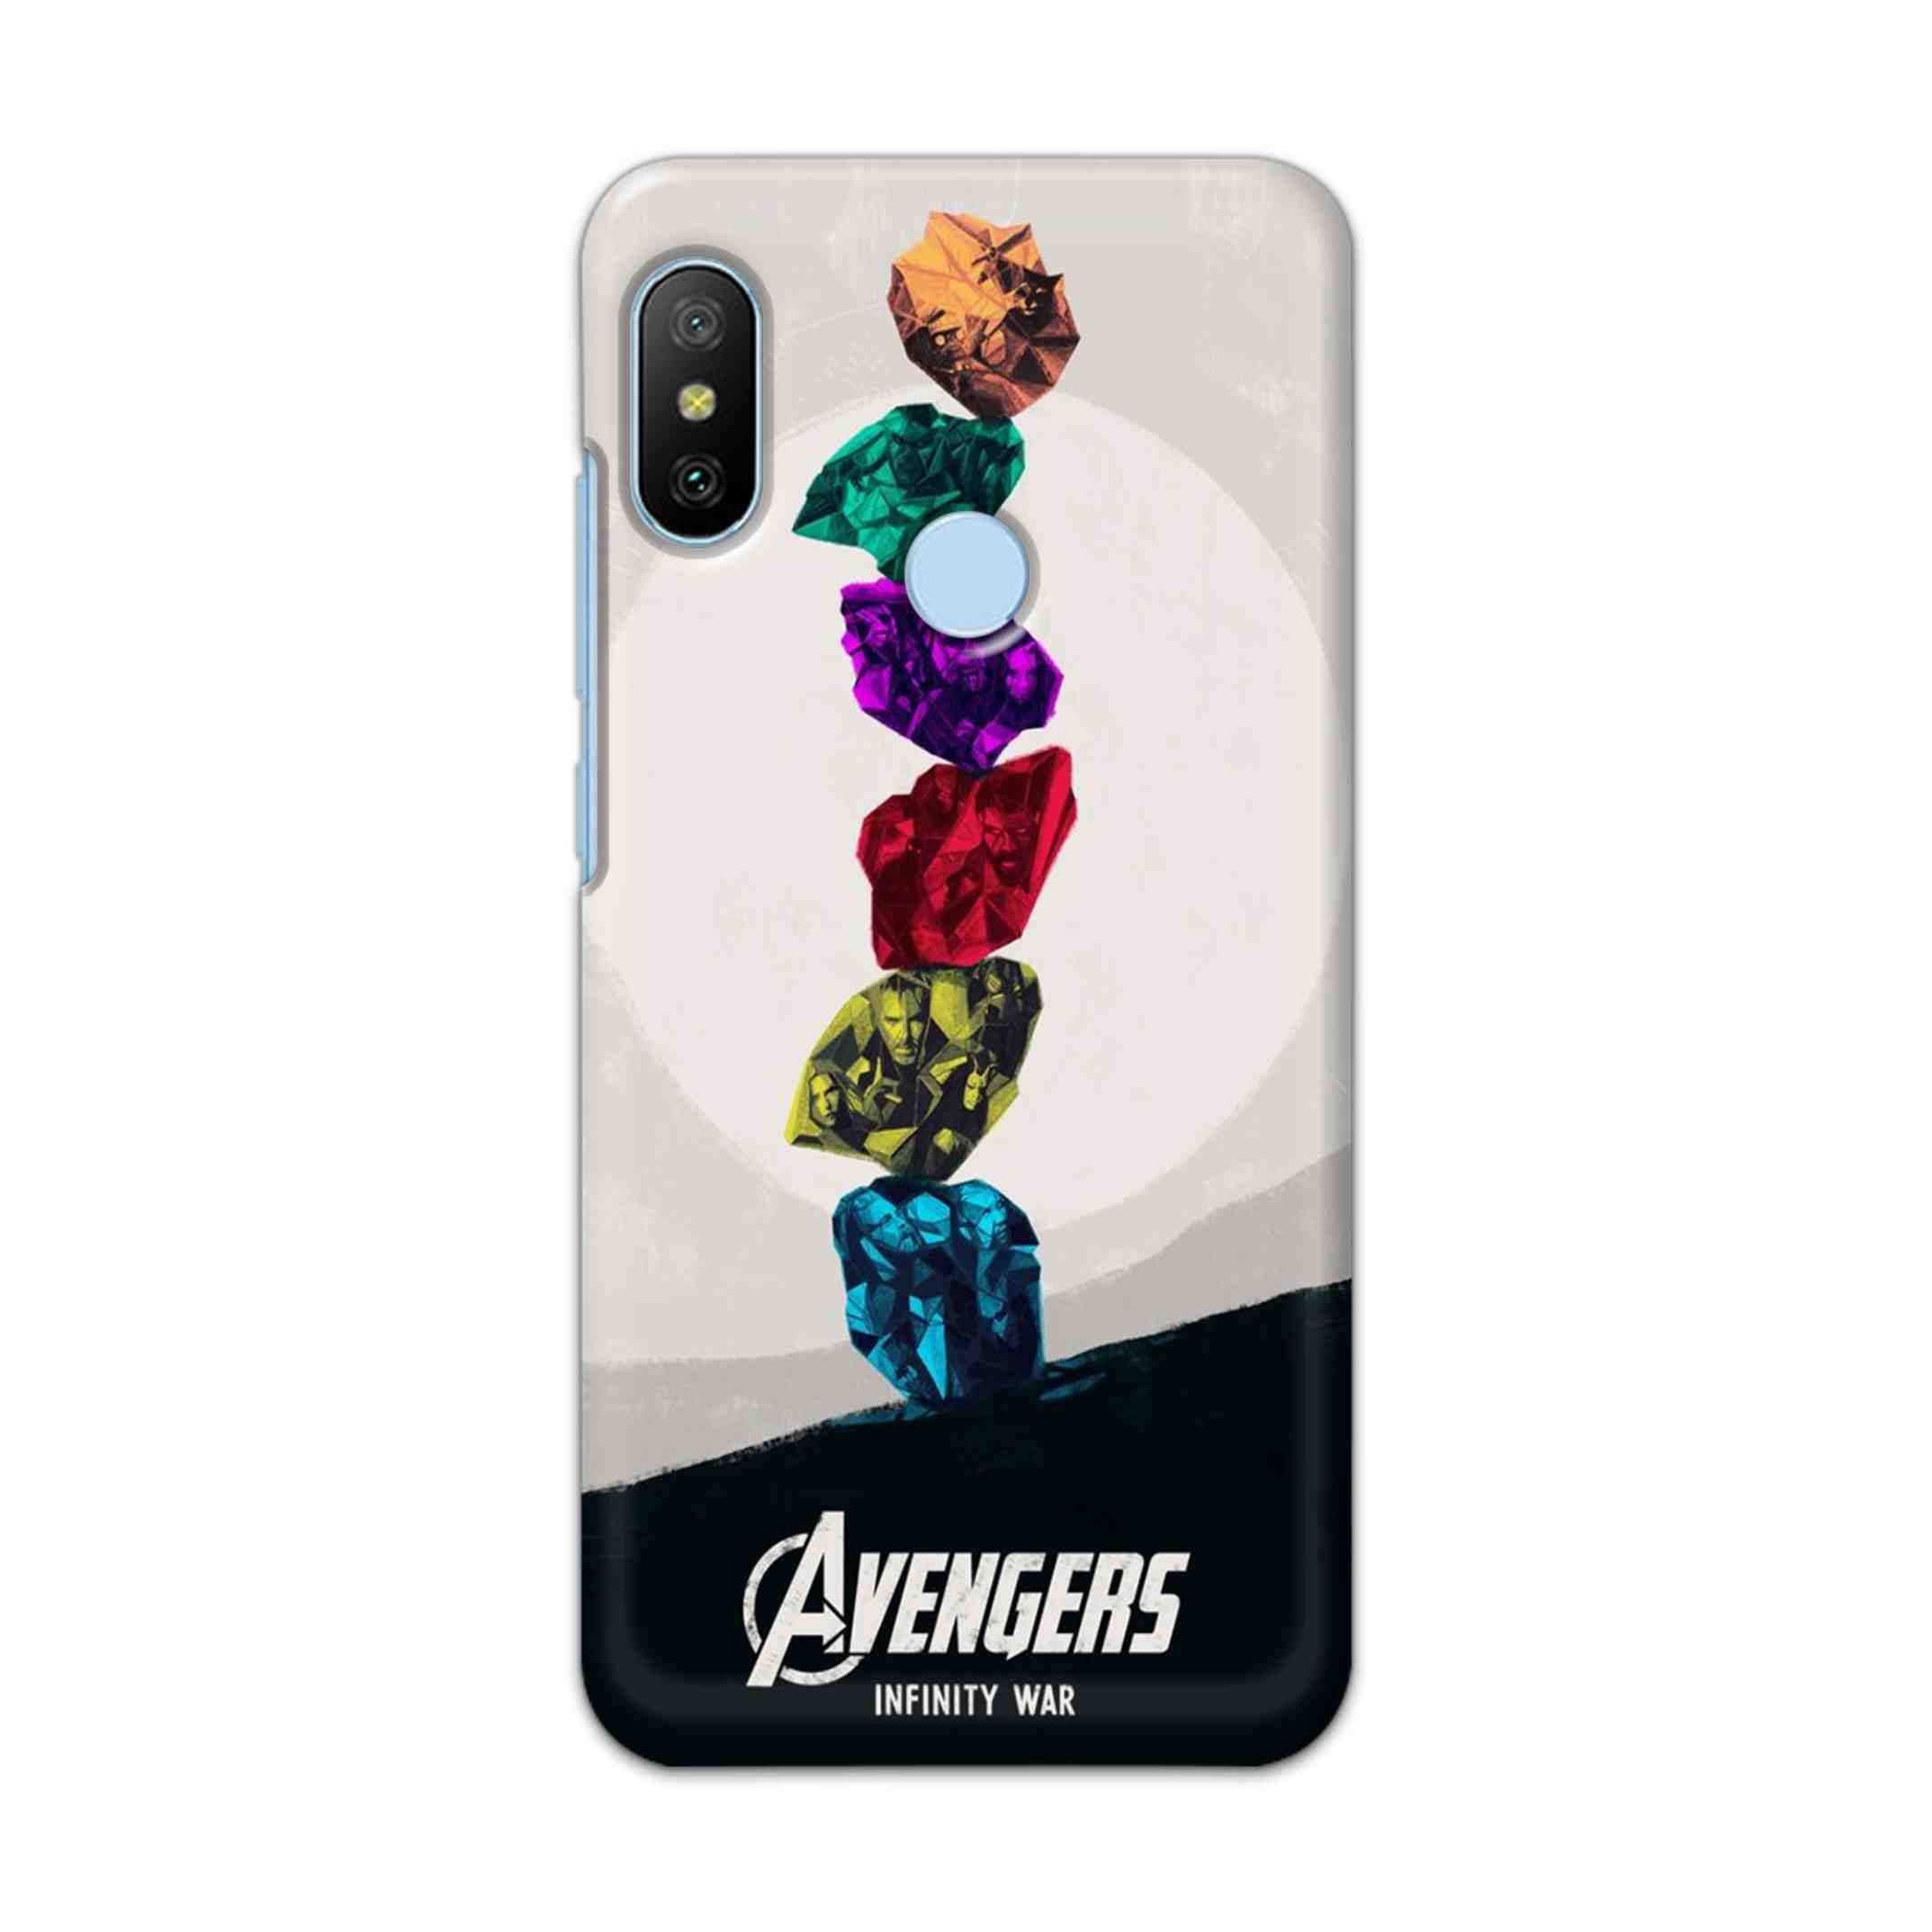 Buy Avengers Stone Hard Back Mobile Phone Case/Cover For Xiaomi Redmi 6 Pro Online